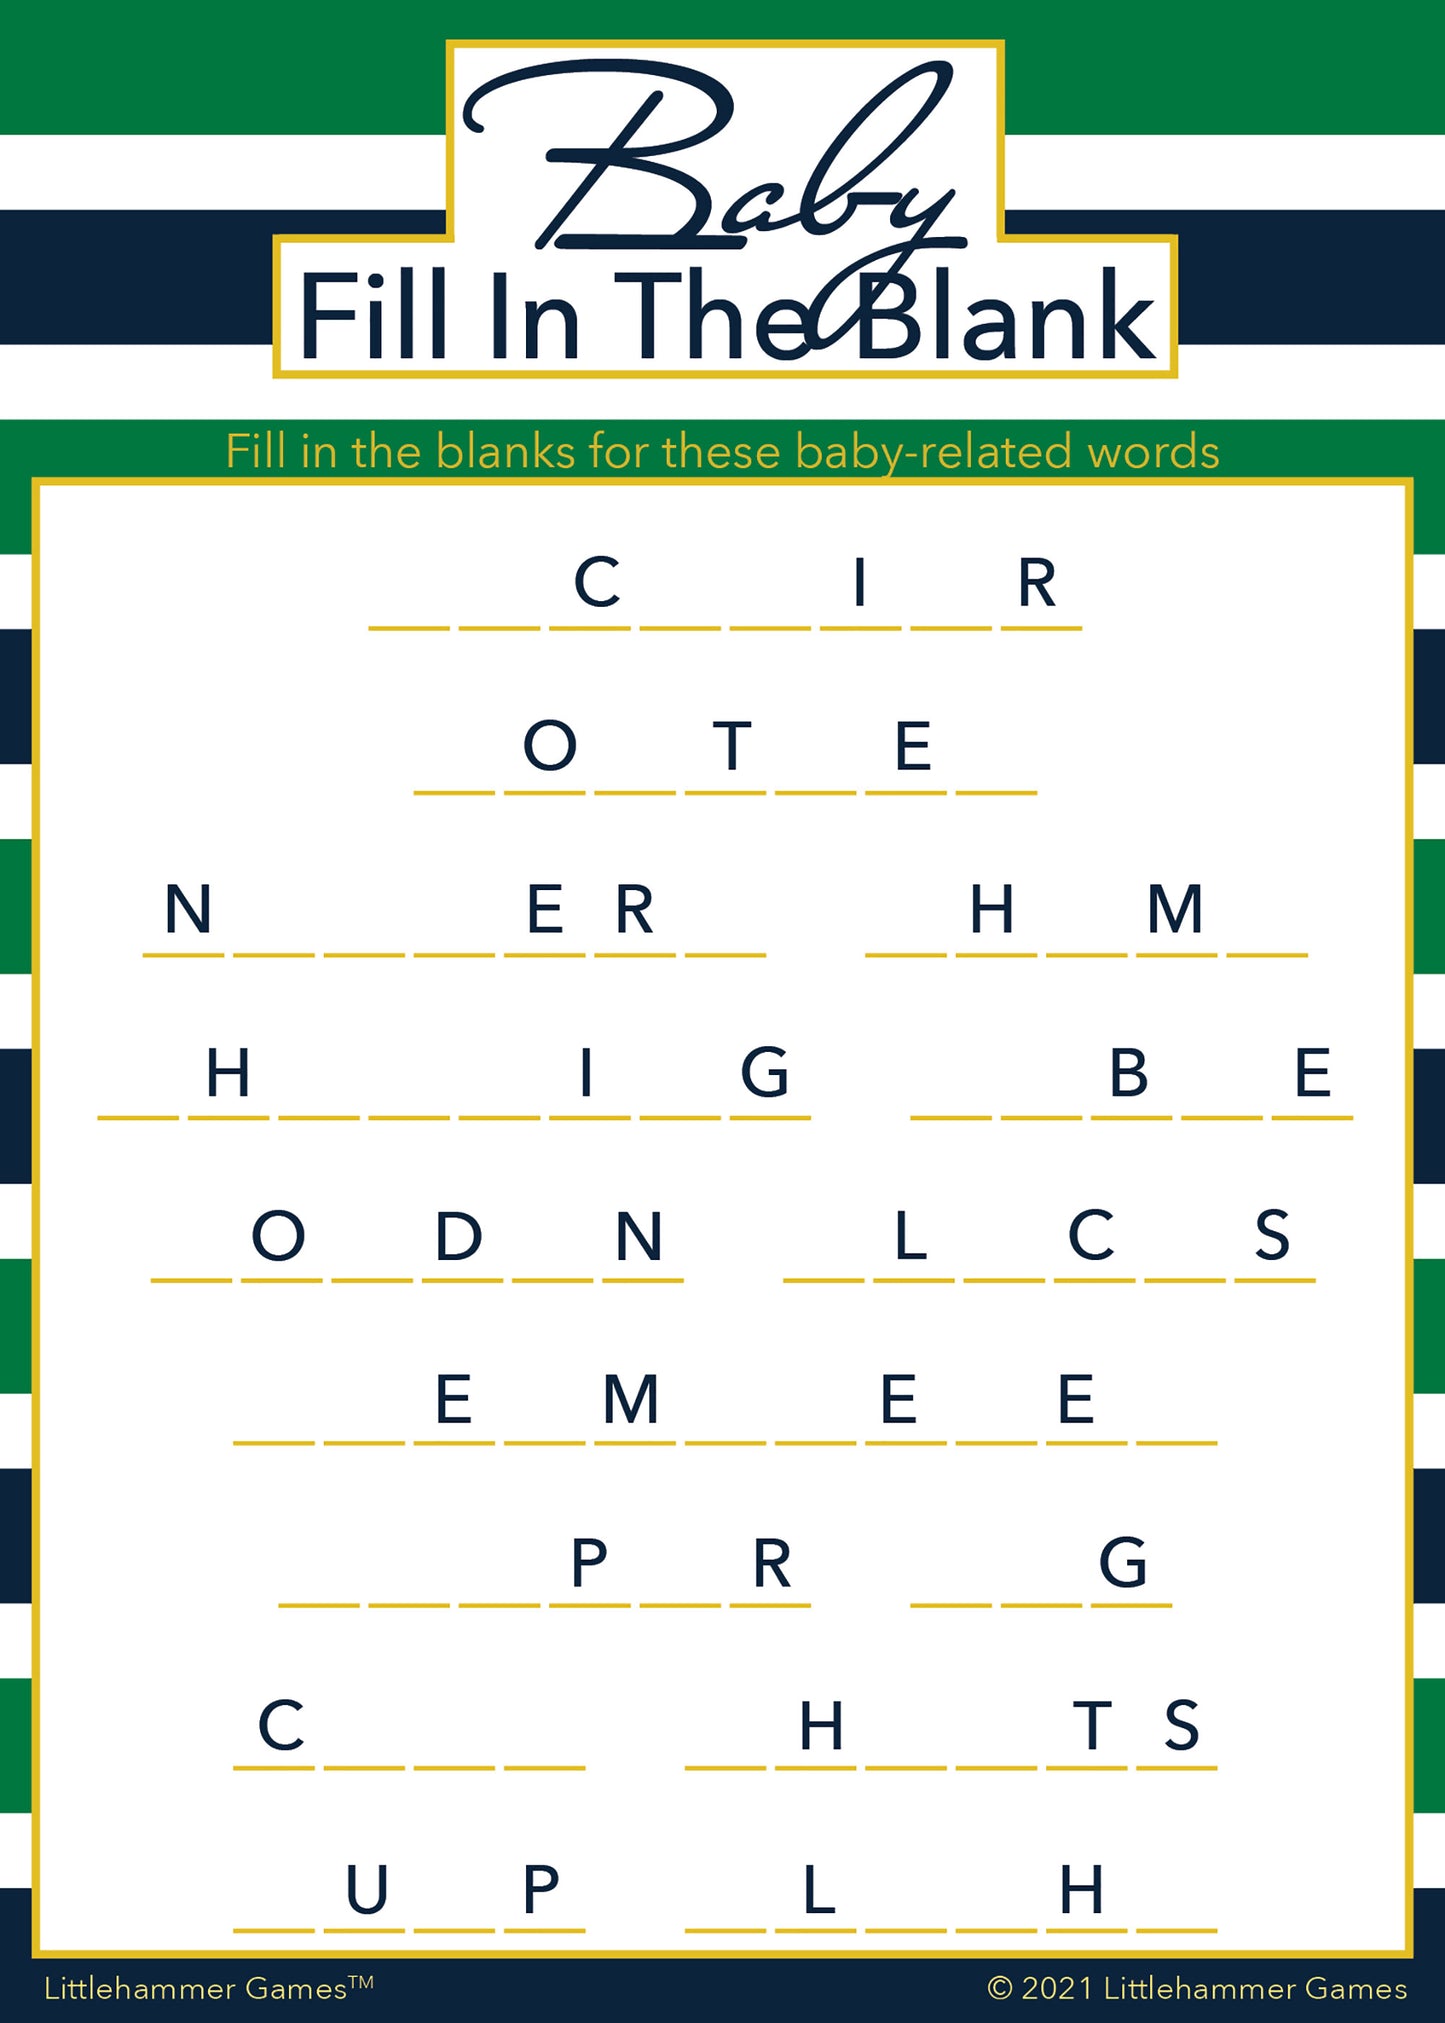 Baby Fill in the Blank game card with a green and navy-striped background